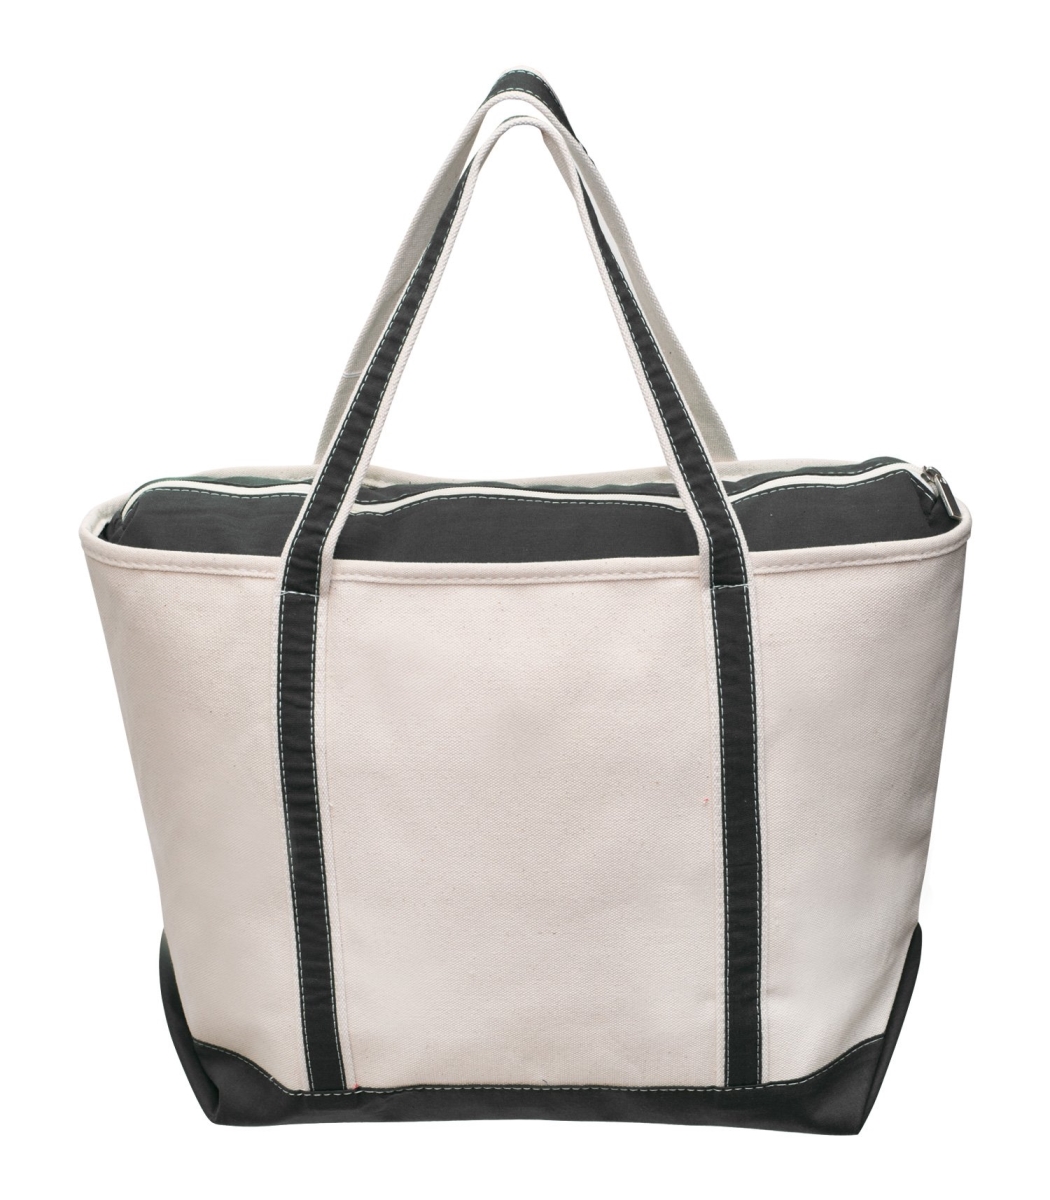 Can02z-black Large Zippered Saling Tote - Black